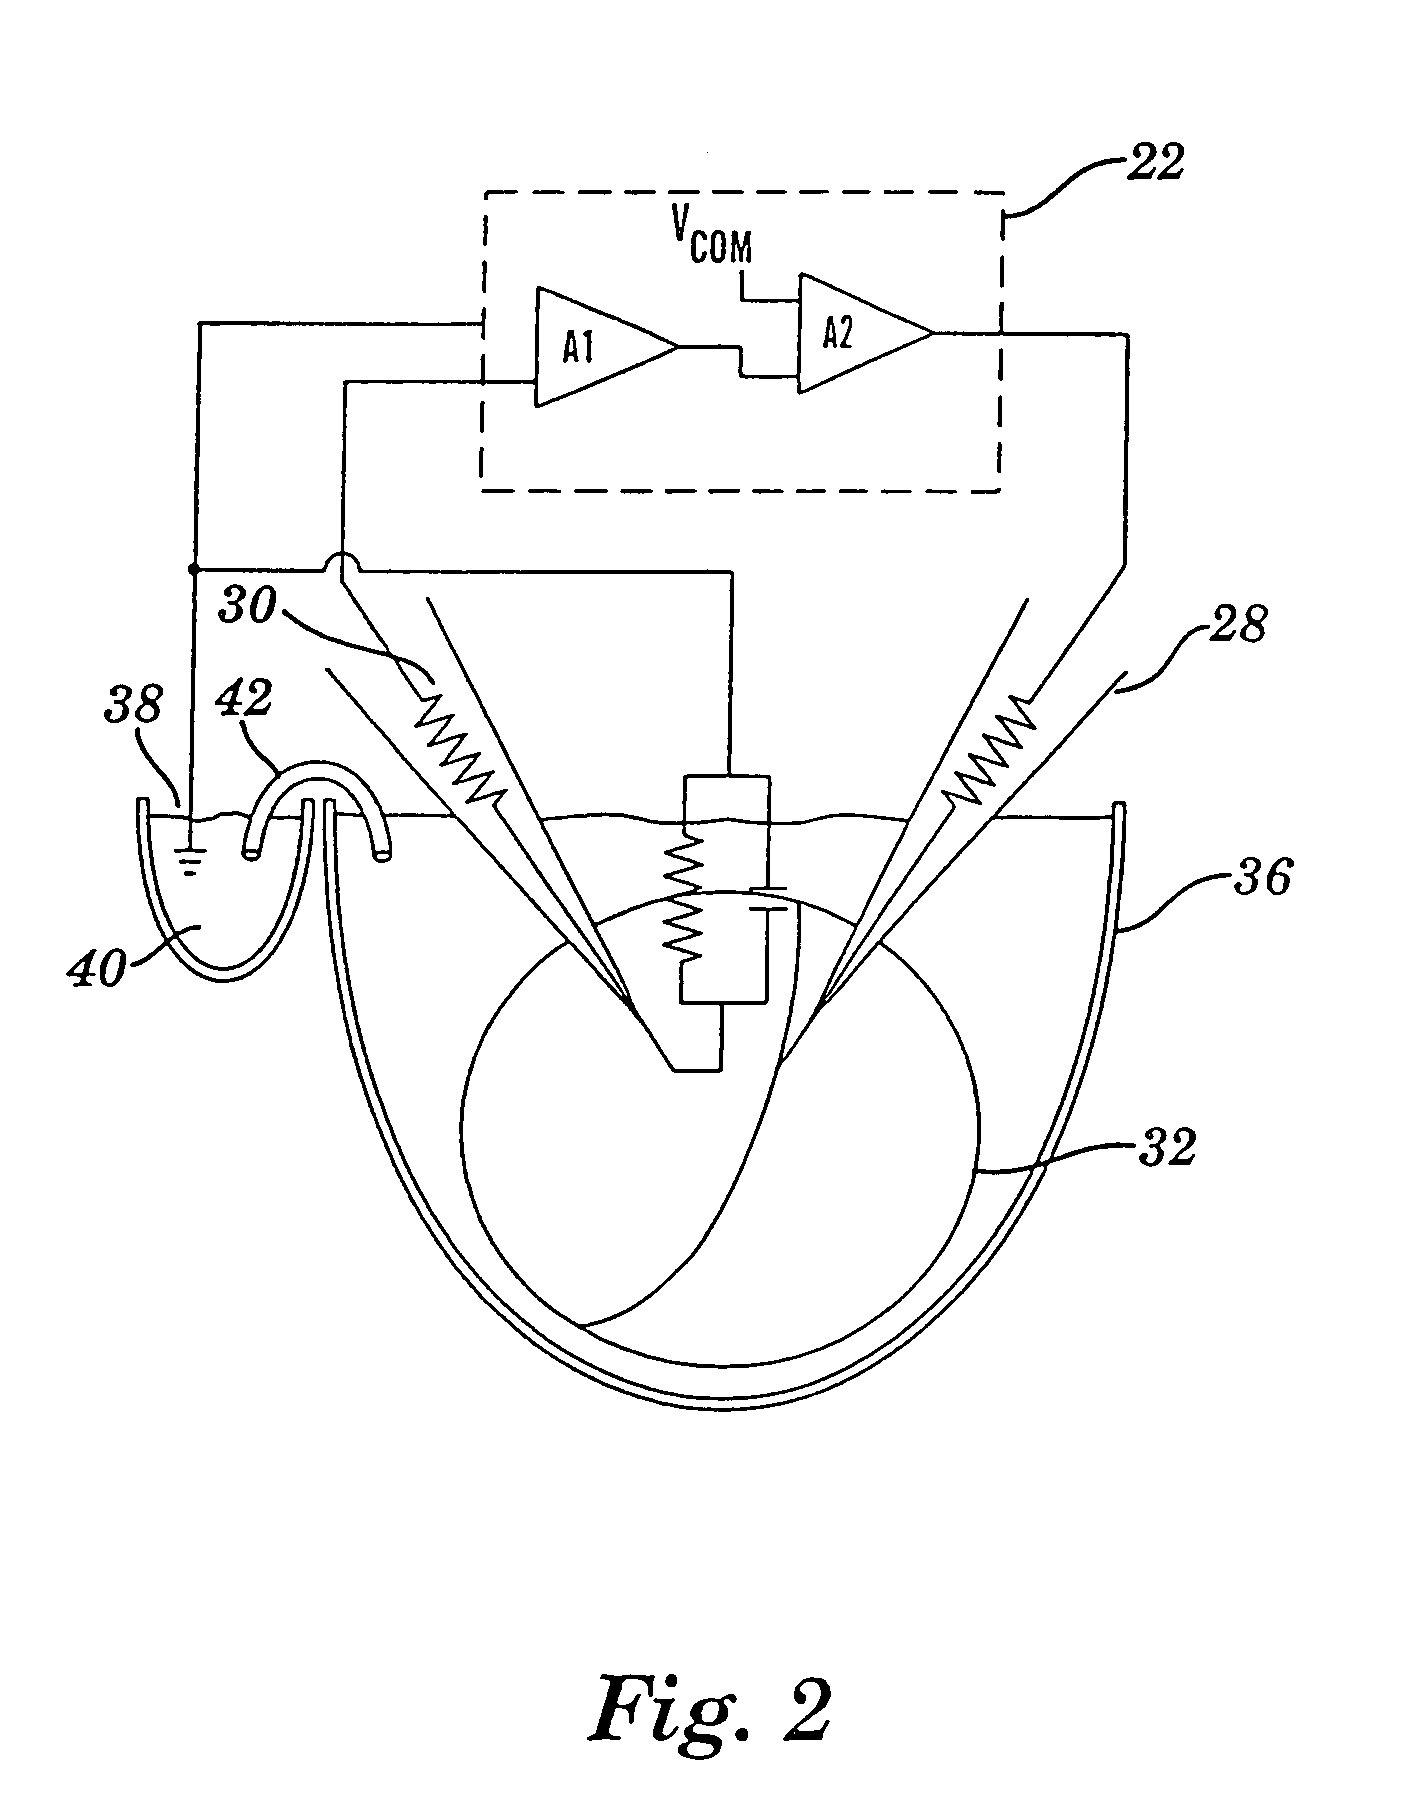 Apparatus for detecting and recording cellular responses